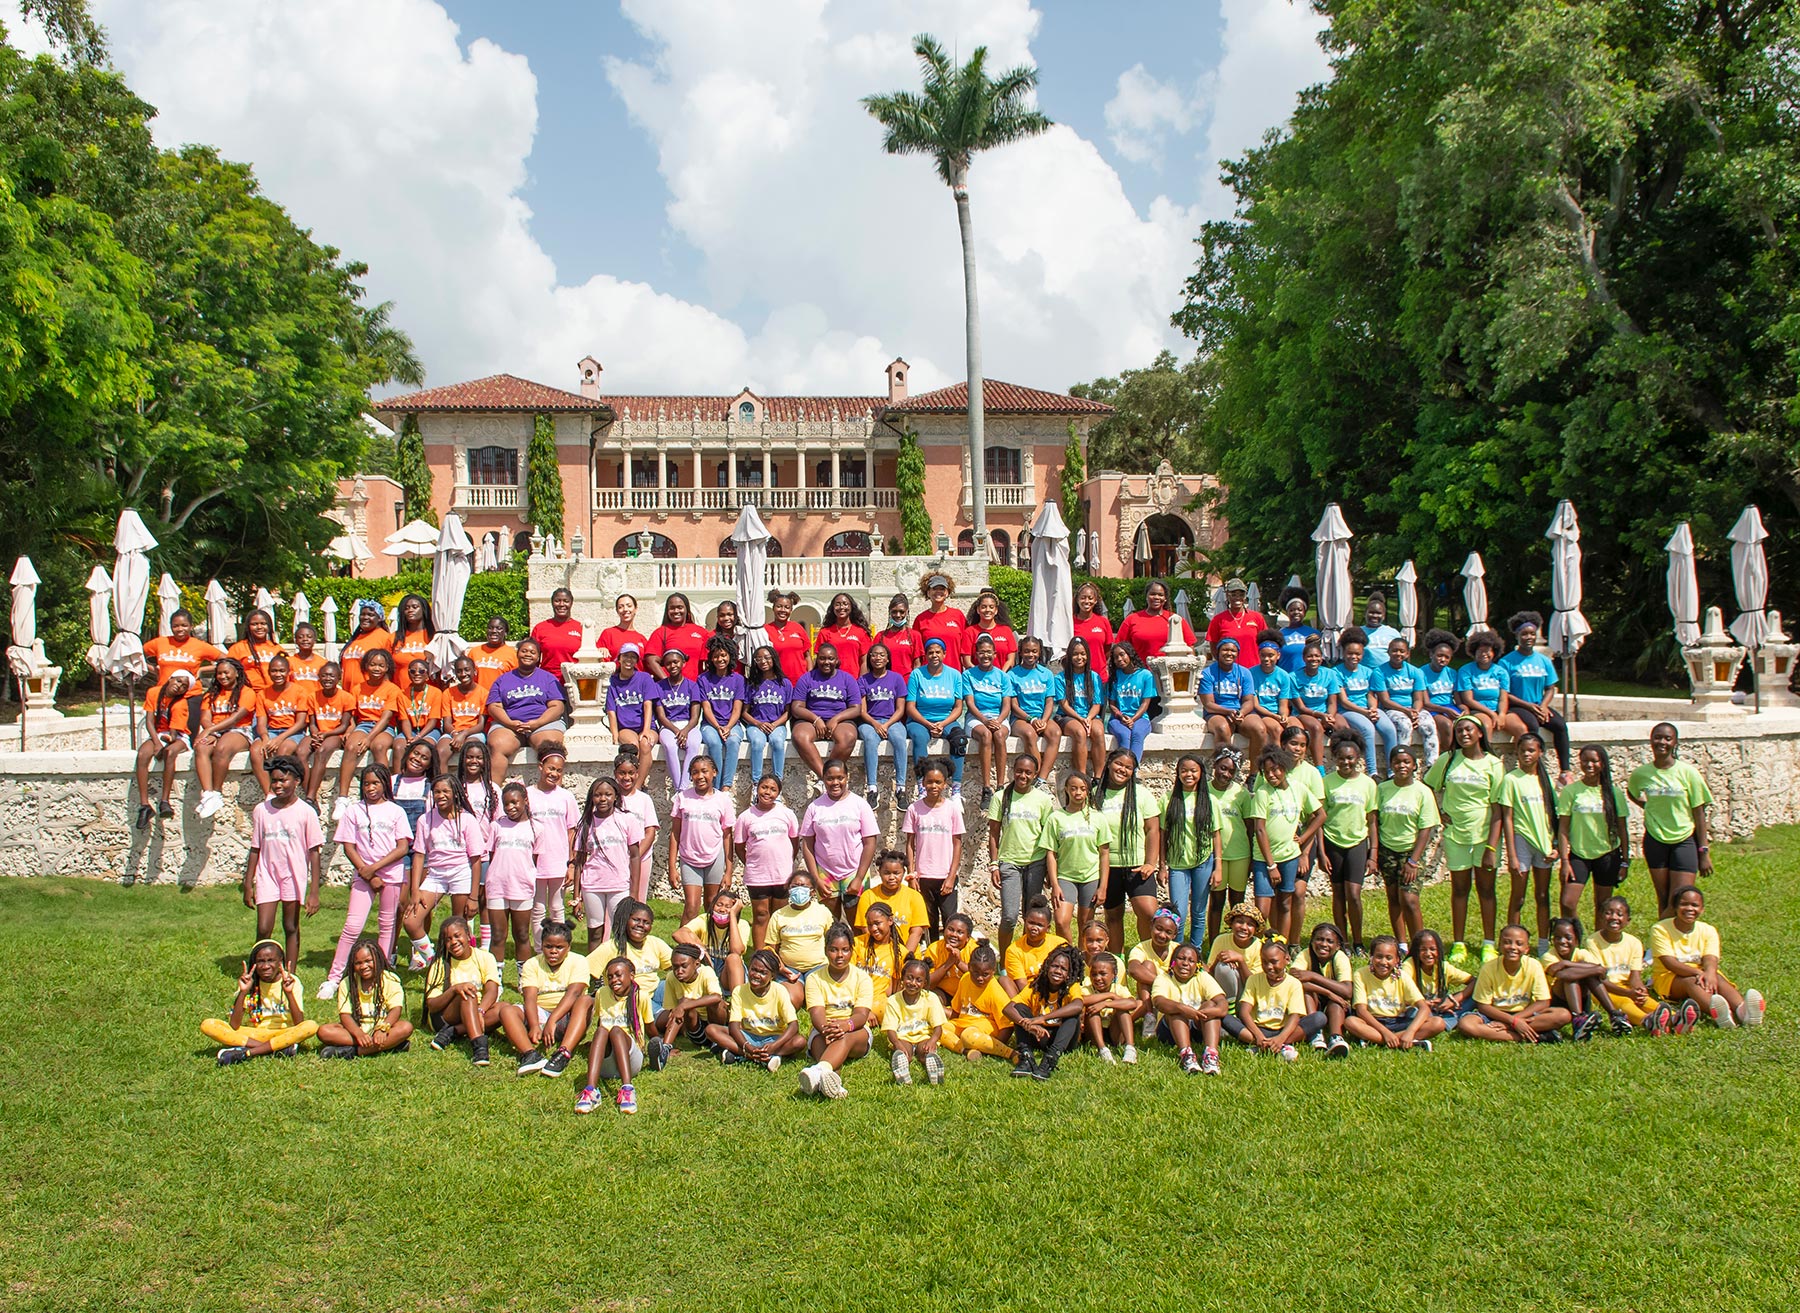 The staff and attendees of Camp Honeyshine pose for a group photo